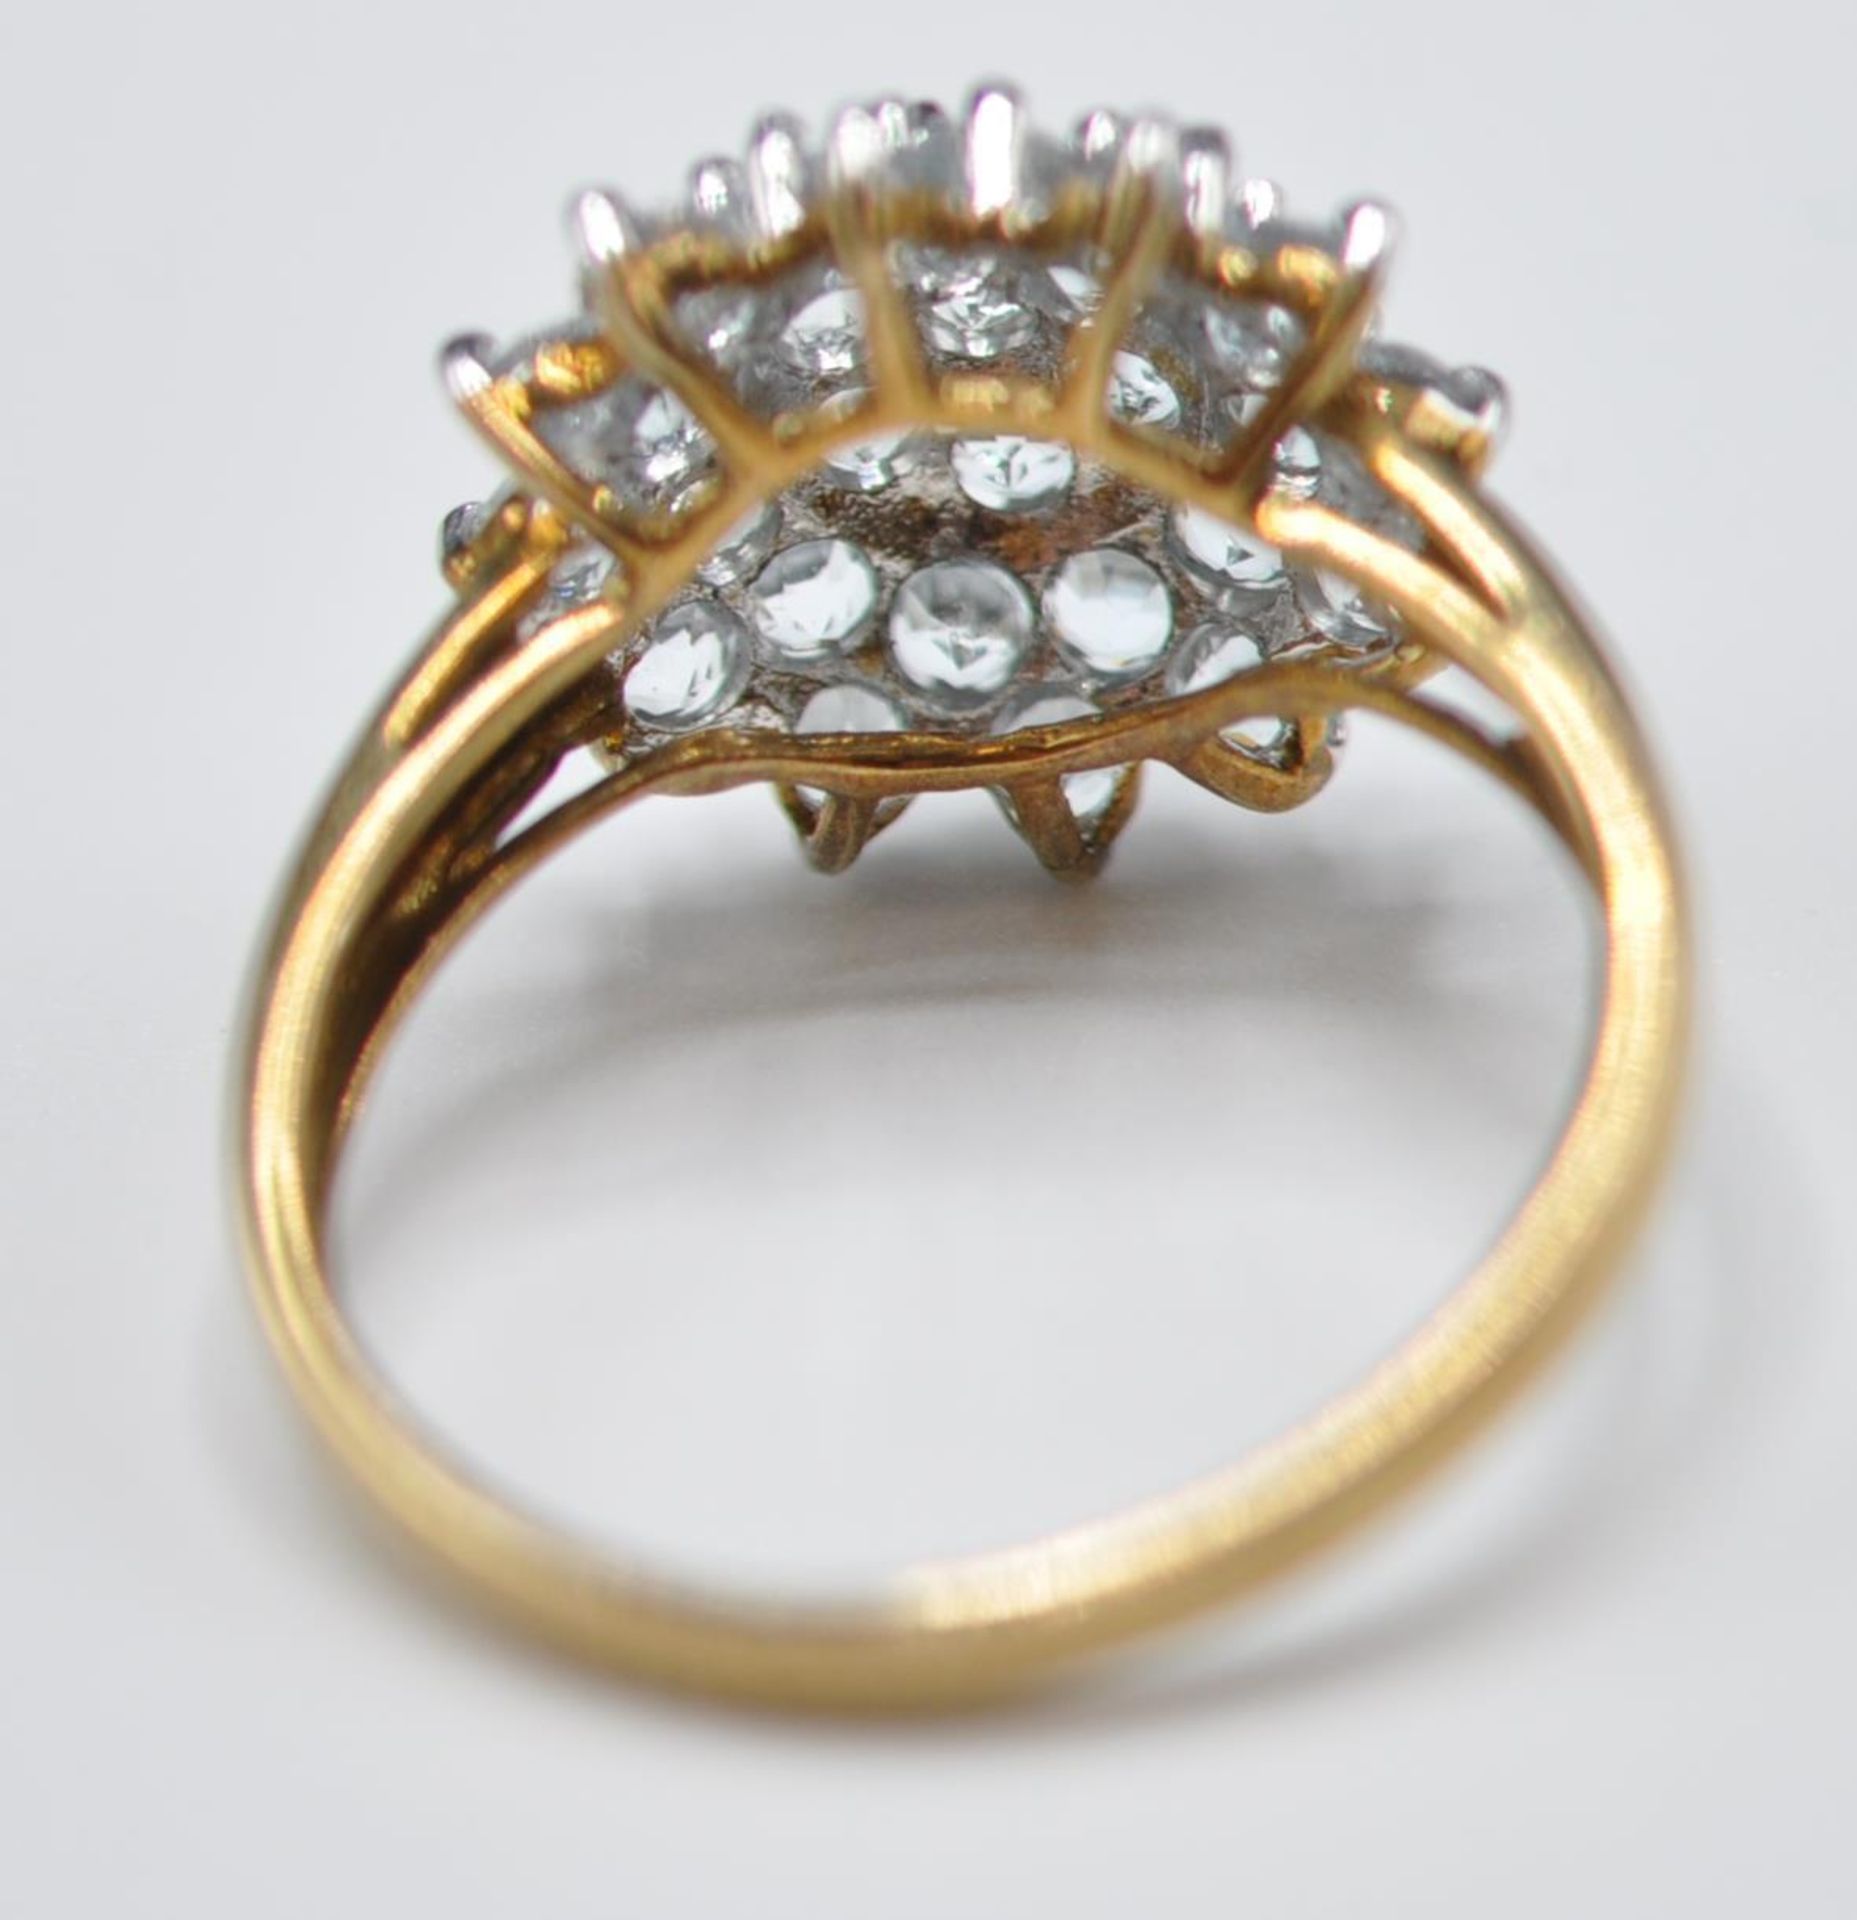 HALLMARKED 9CT GOLD AND BLUE STONE CLUSTER RING - Image 5 of 7